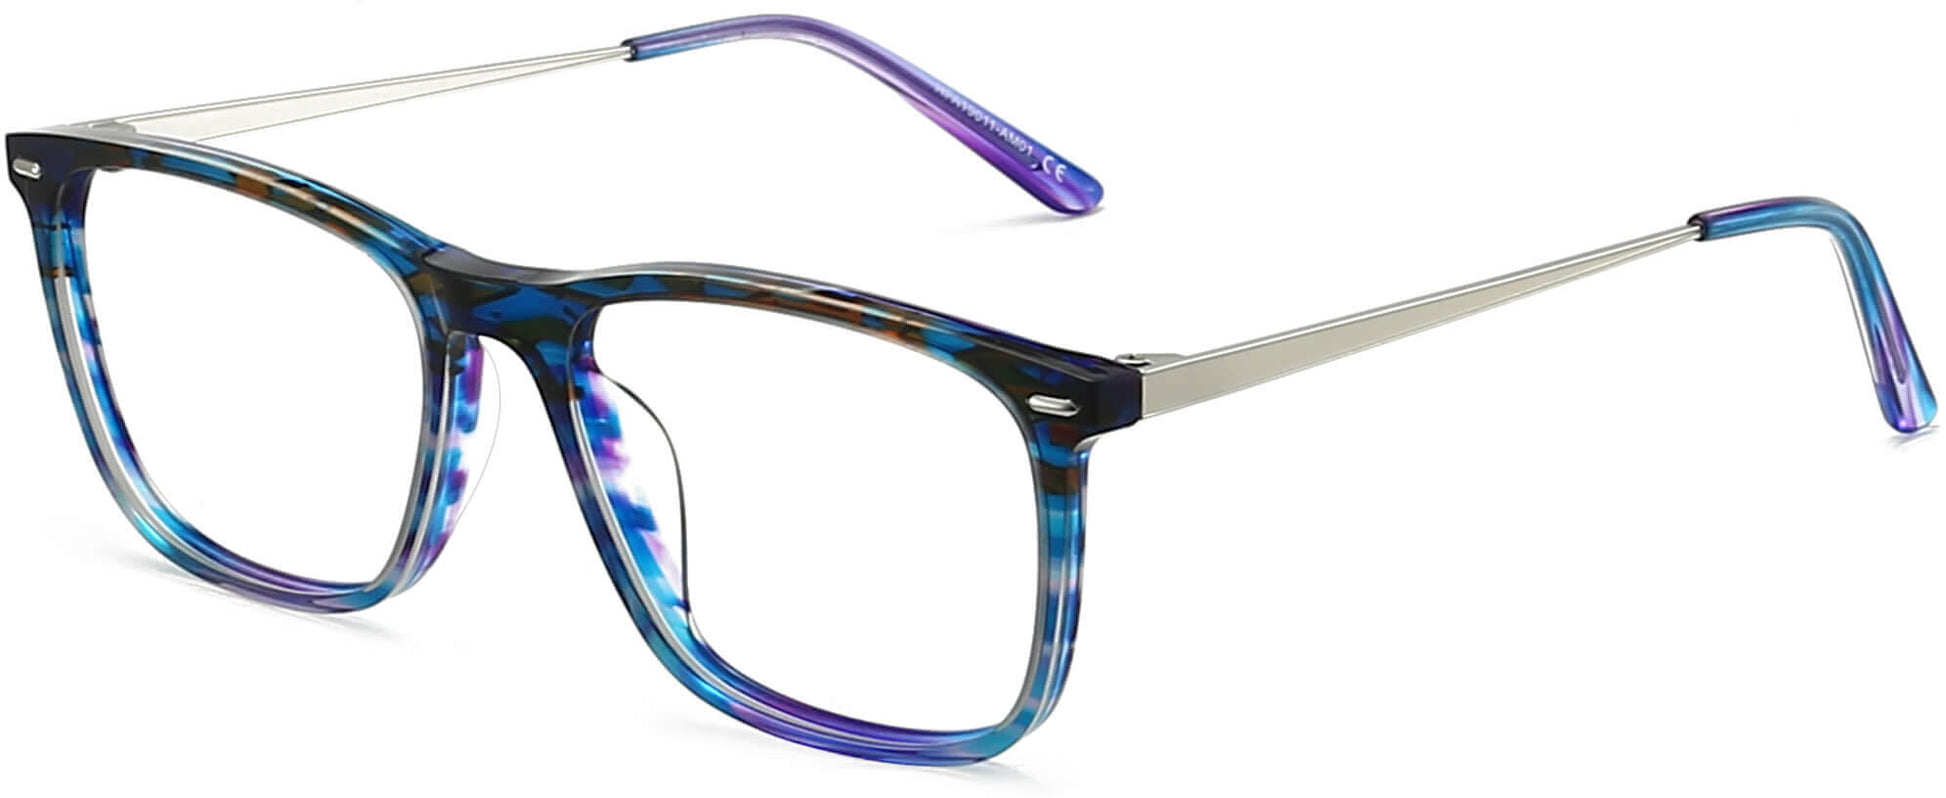 Tiffany Rectangle Blue Eyeglasses from ANRRI, angle view